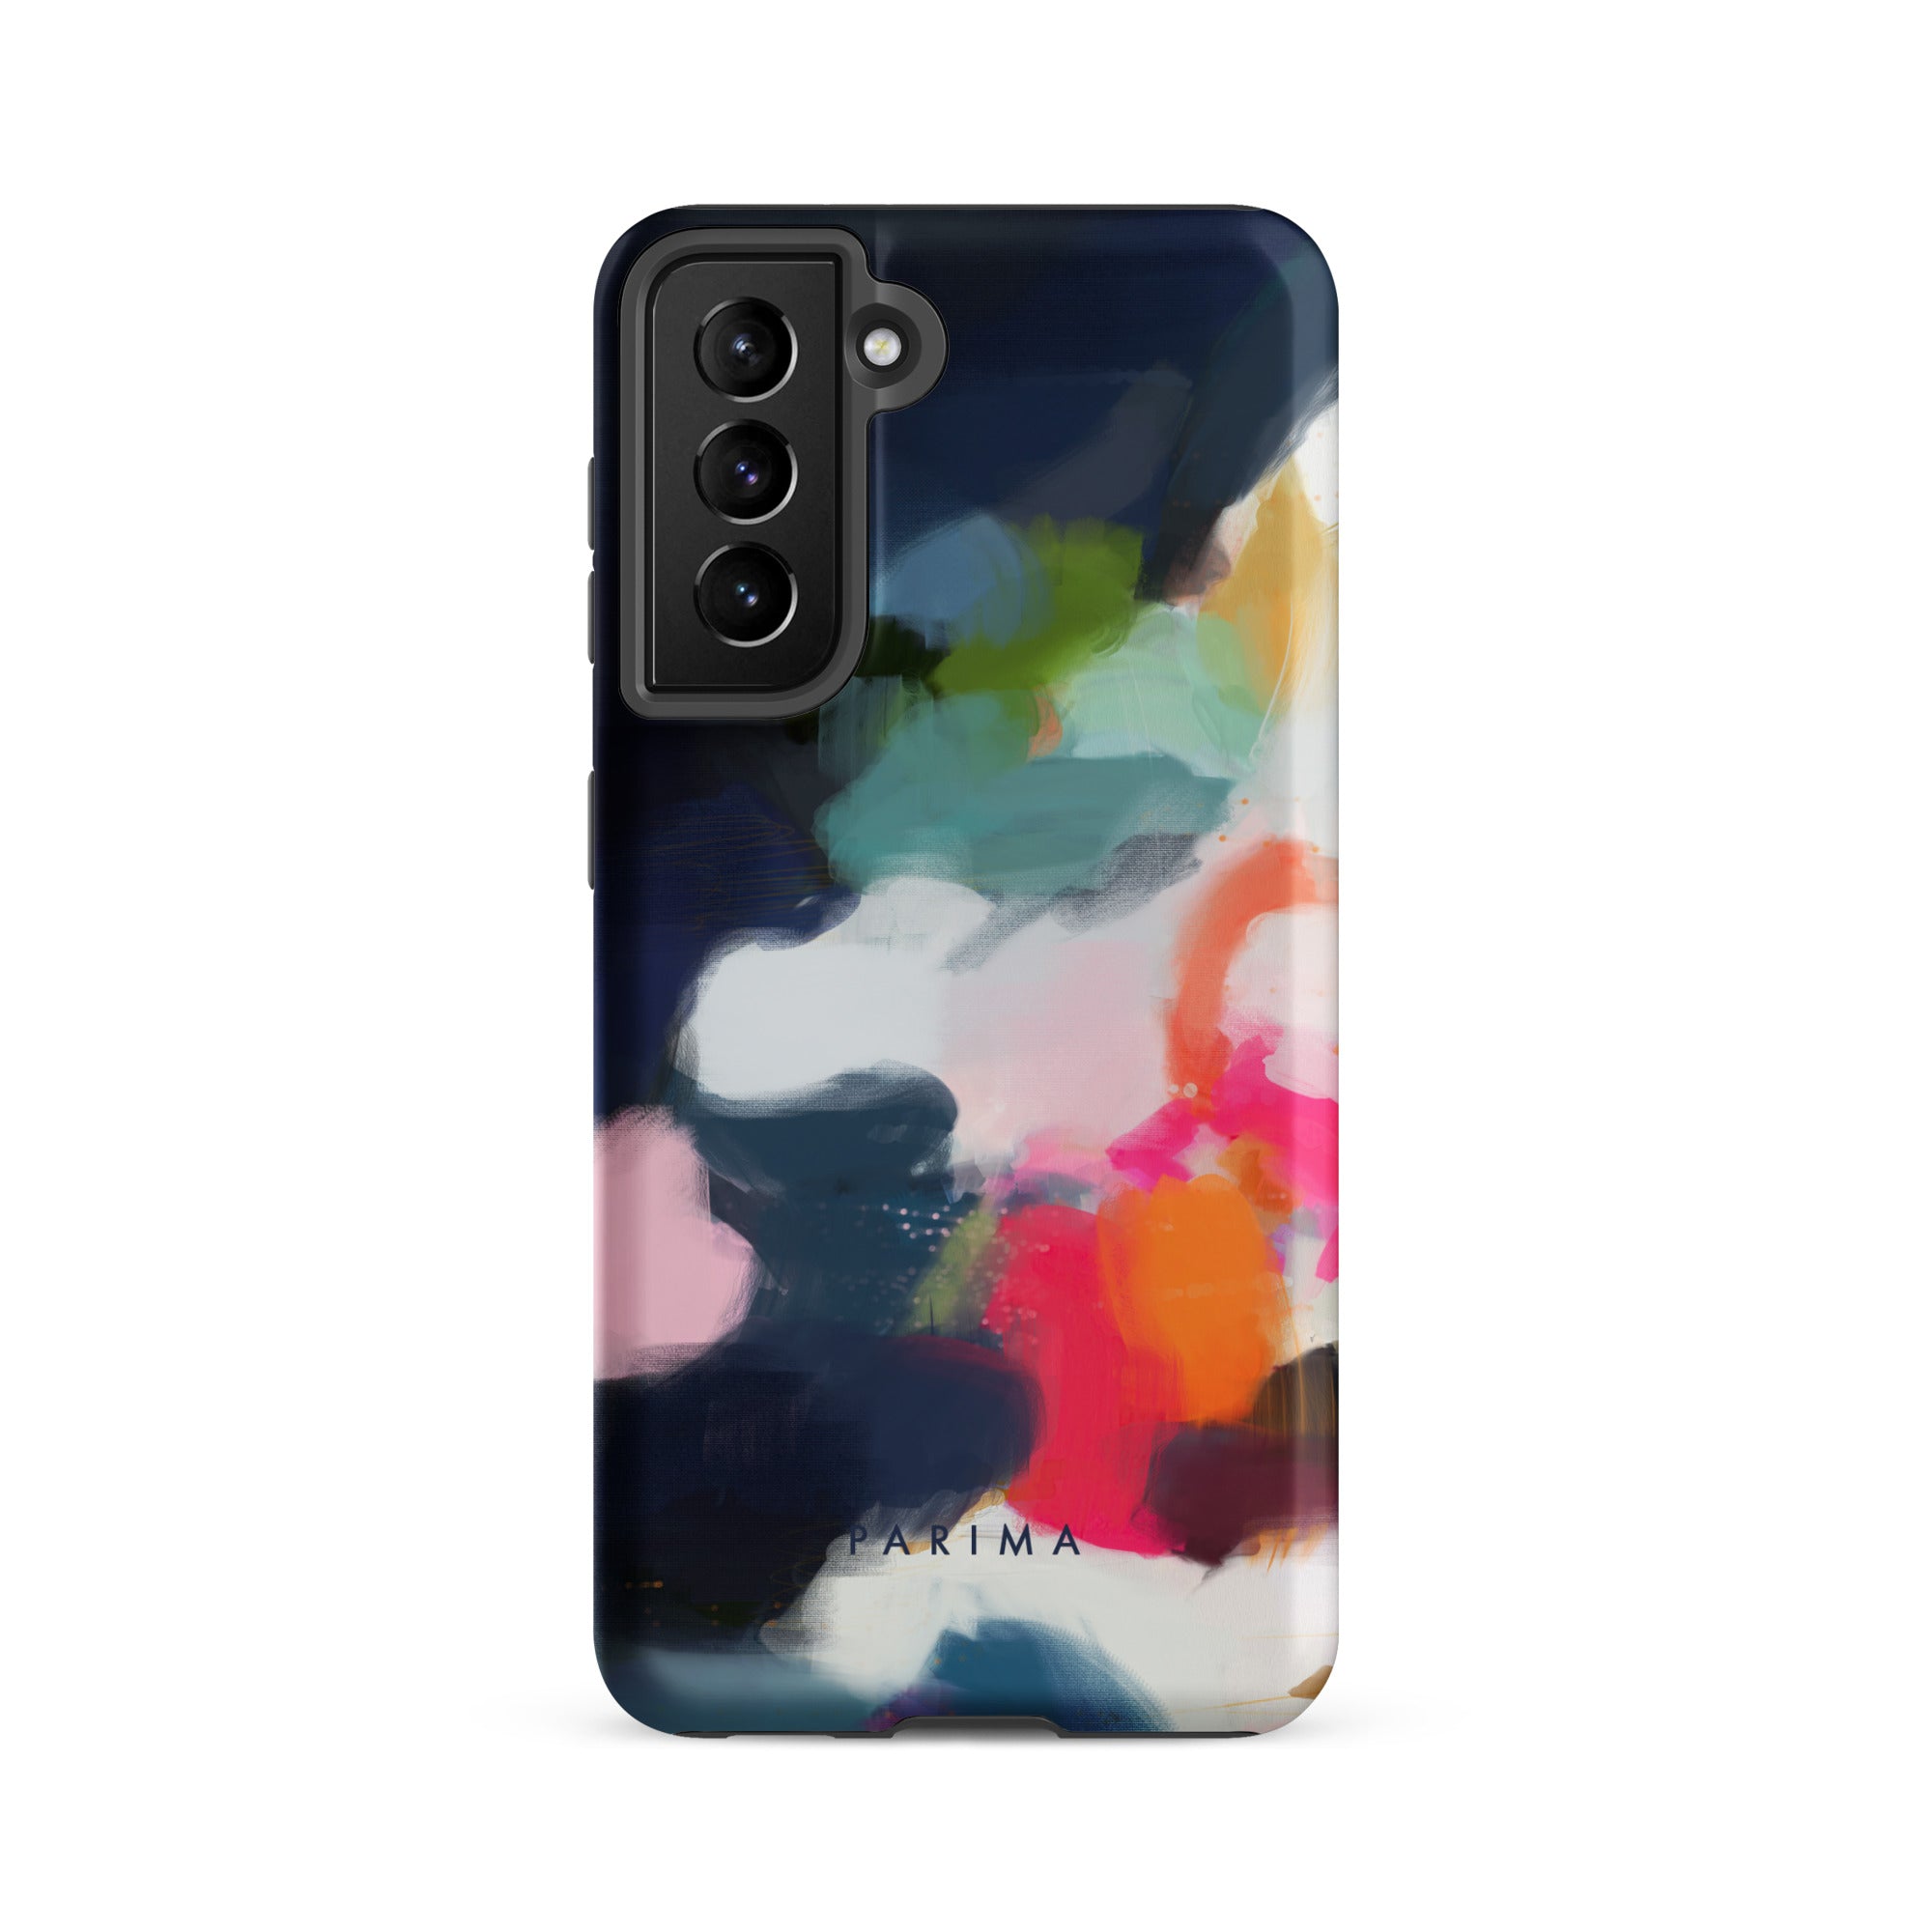 Eliza, blue and pink abstract art on Samsung Galaxy S21 FE tough case by Parima Studio